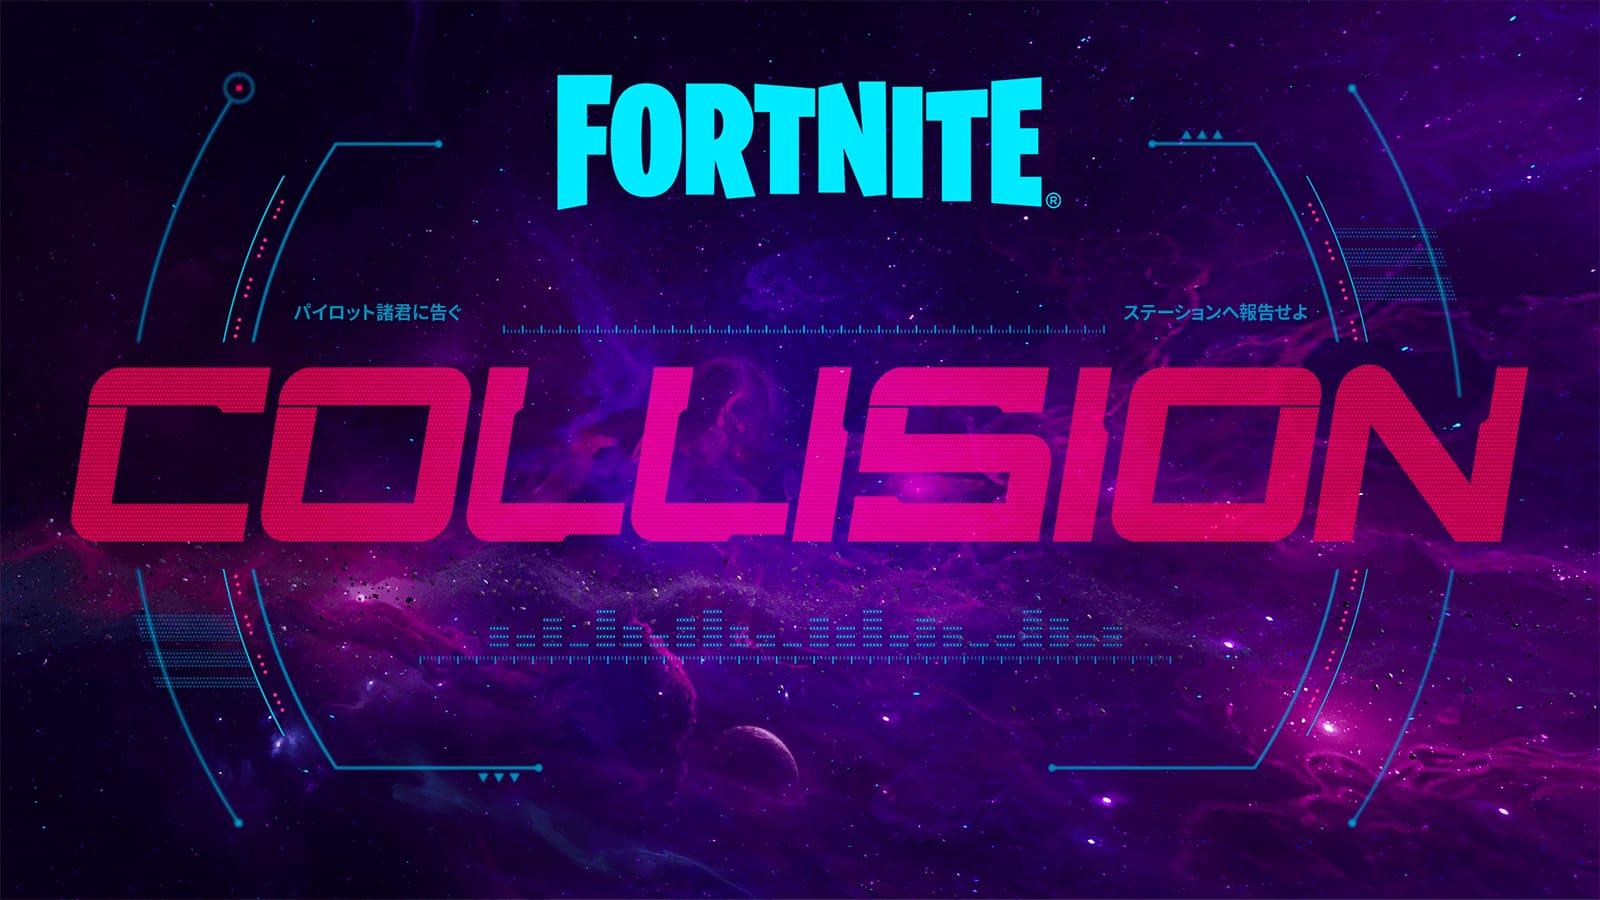 A poster for the Fortnite Collision live event